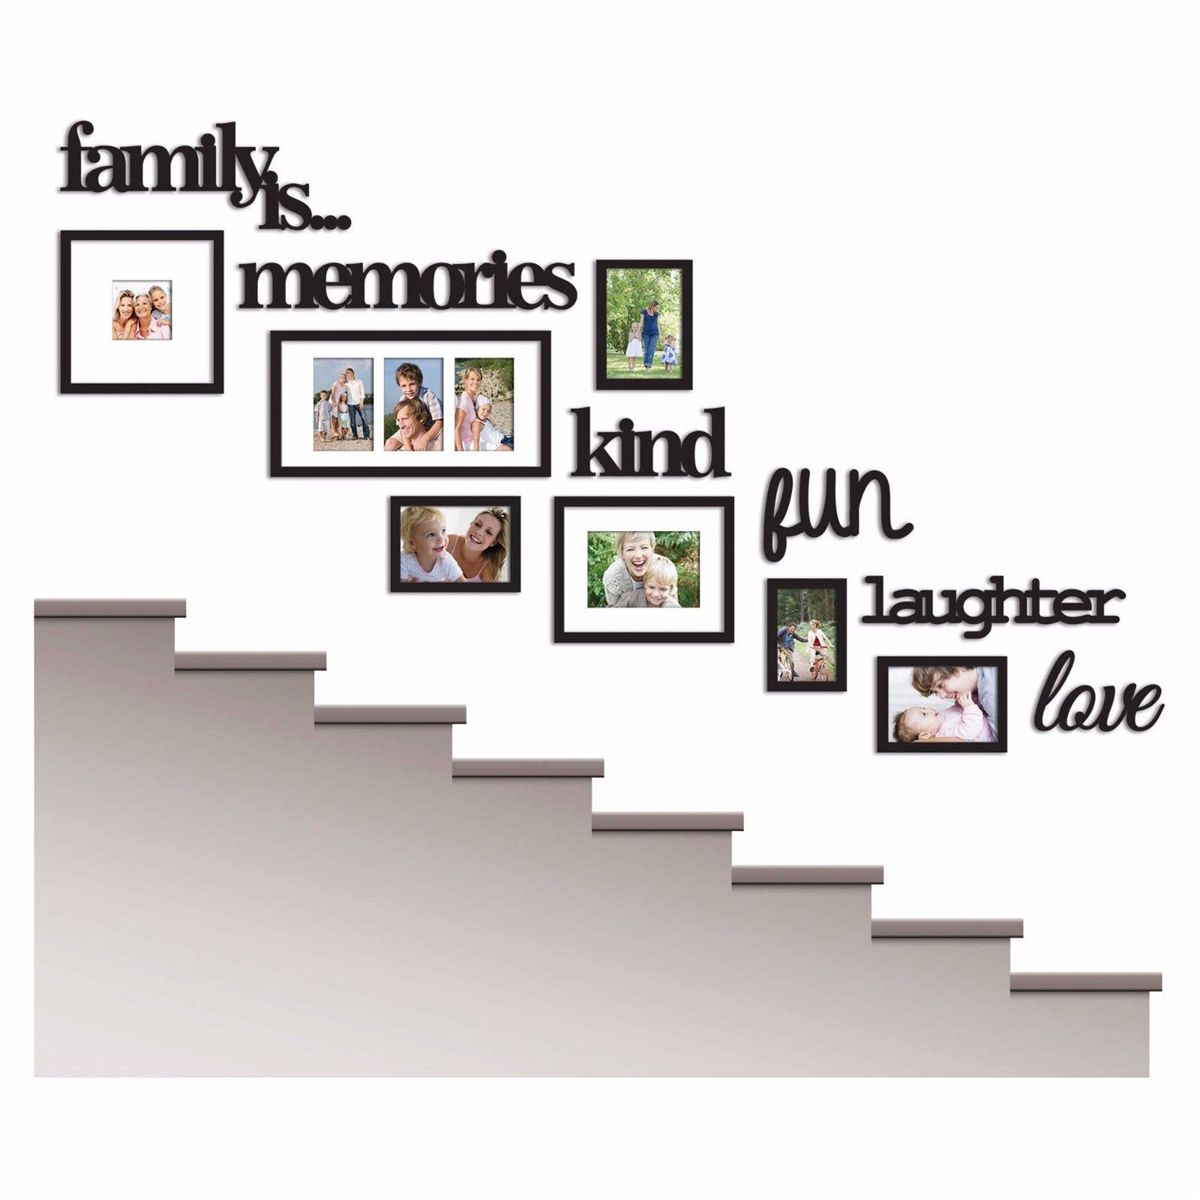 13PcsSet-Family-Photo-Frame-Home-Hanging-Wall-Decorative-Collage-Decoration-Wedding-Picture-Sticker-1463236